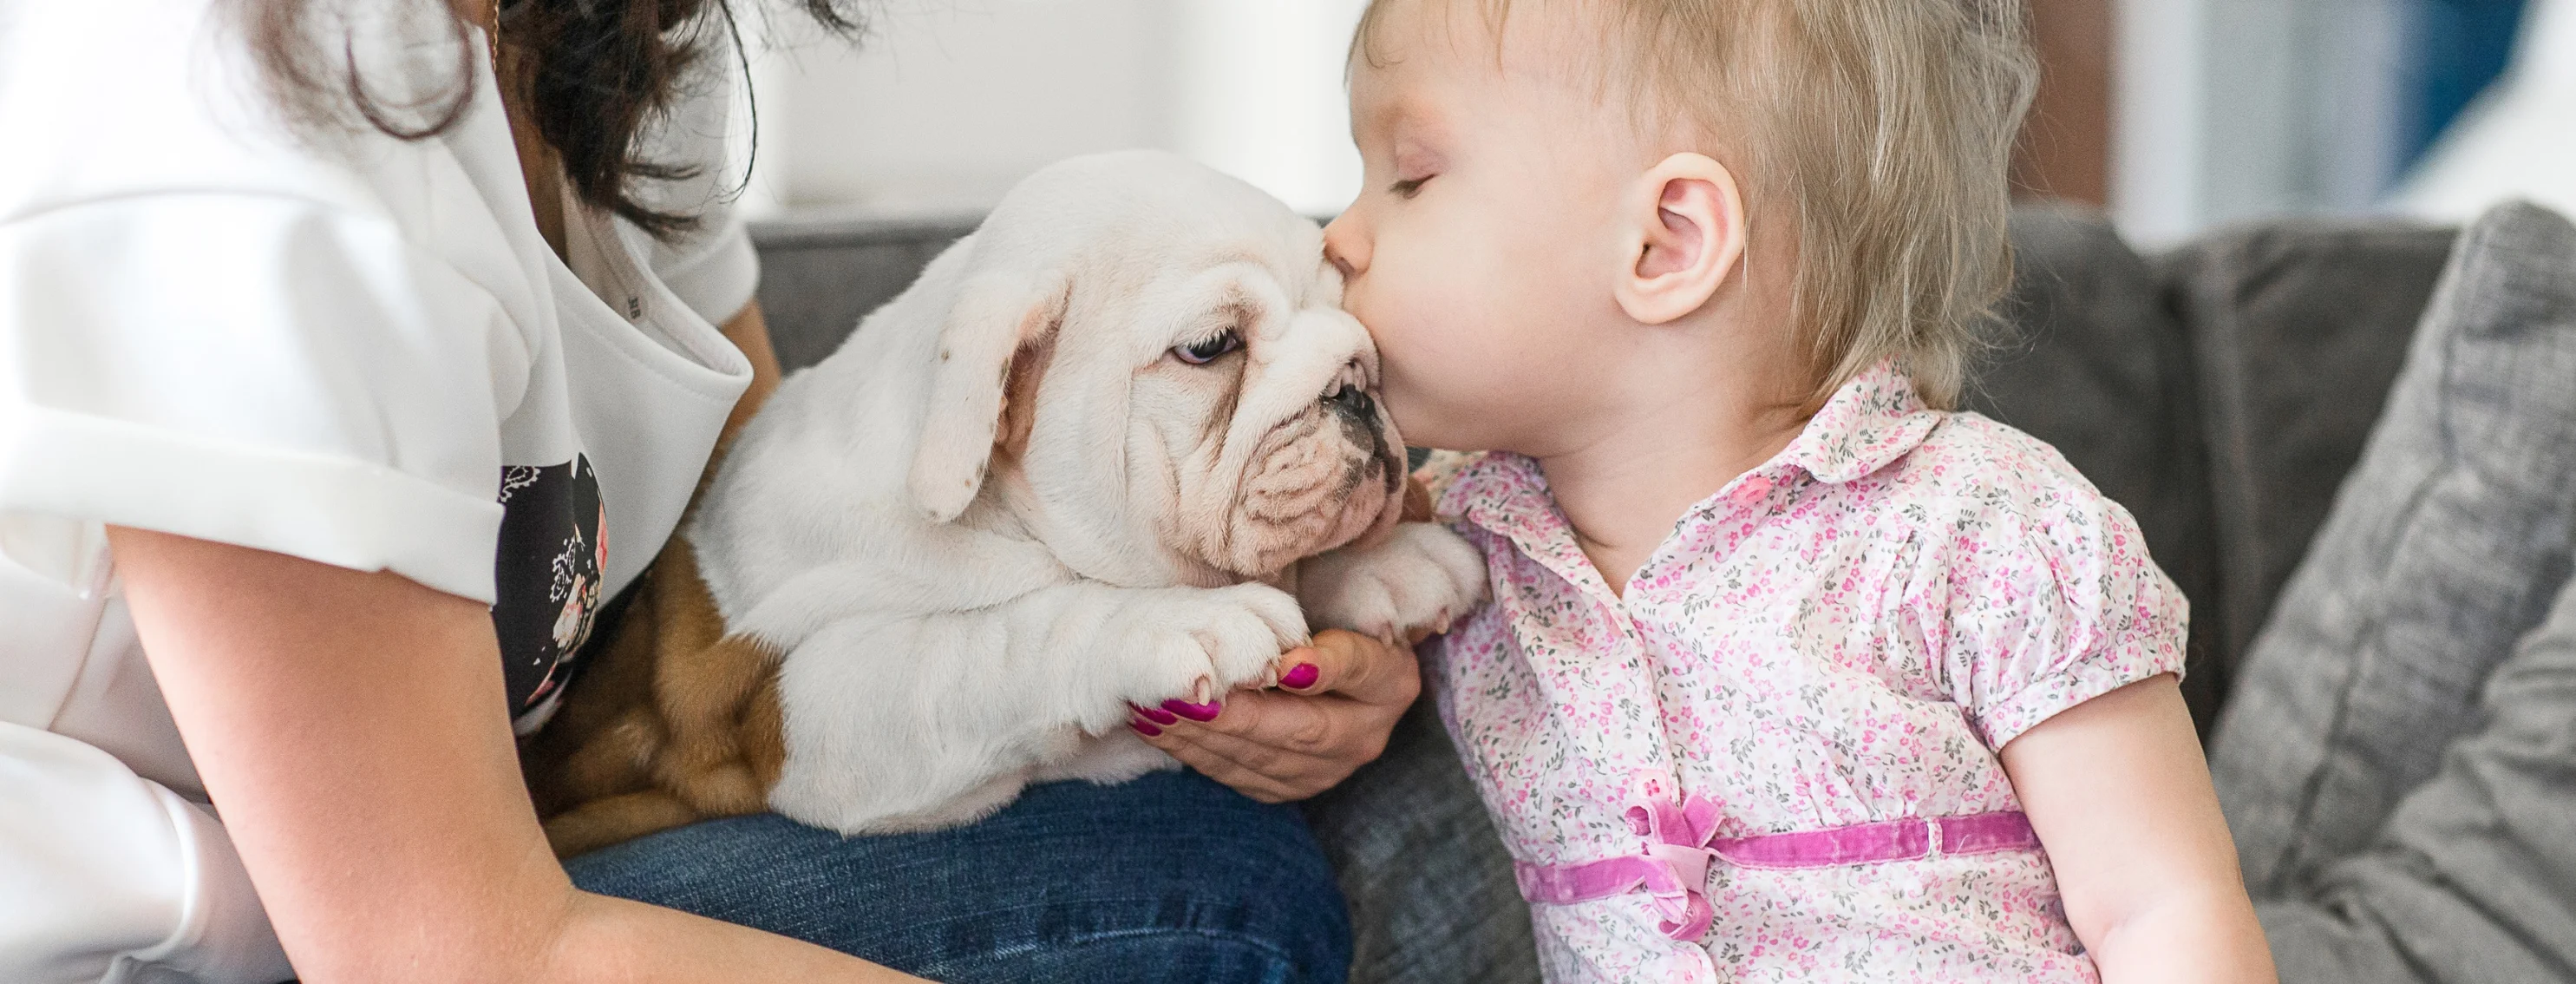 Baby kissing a puppy